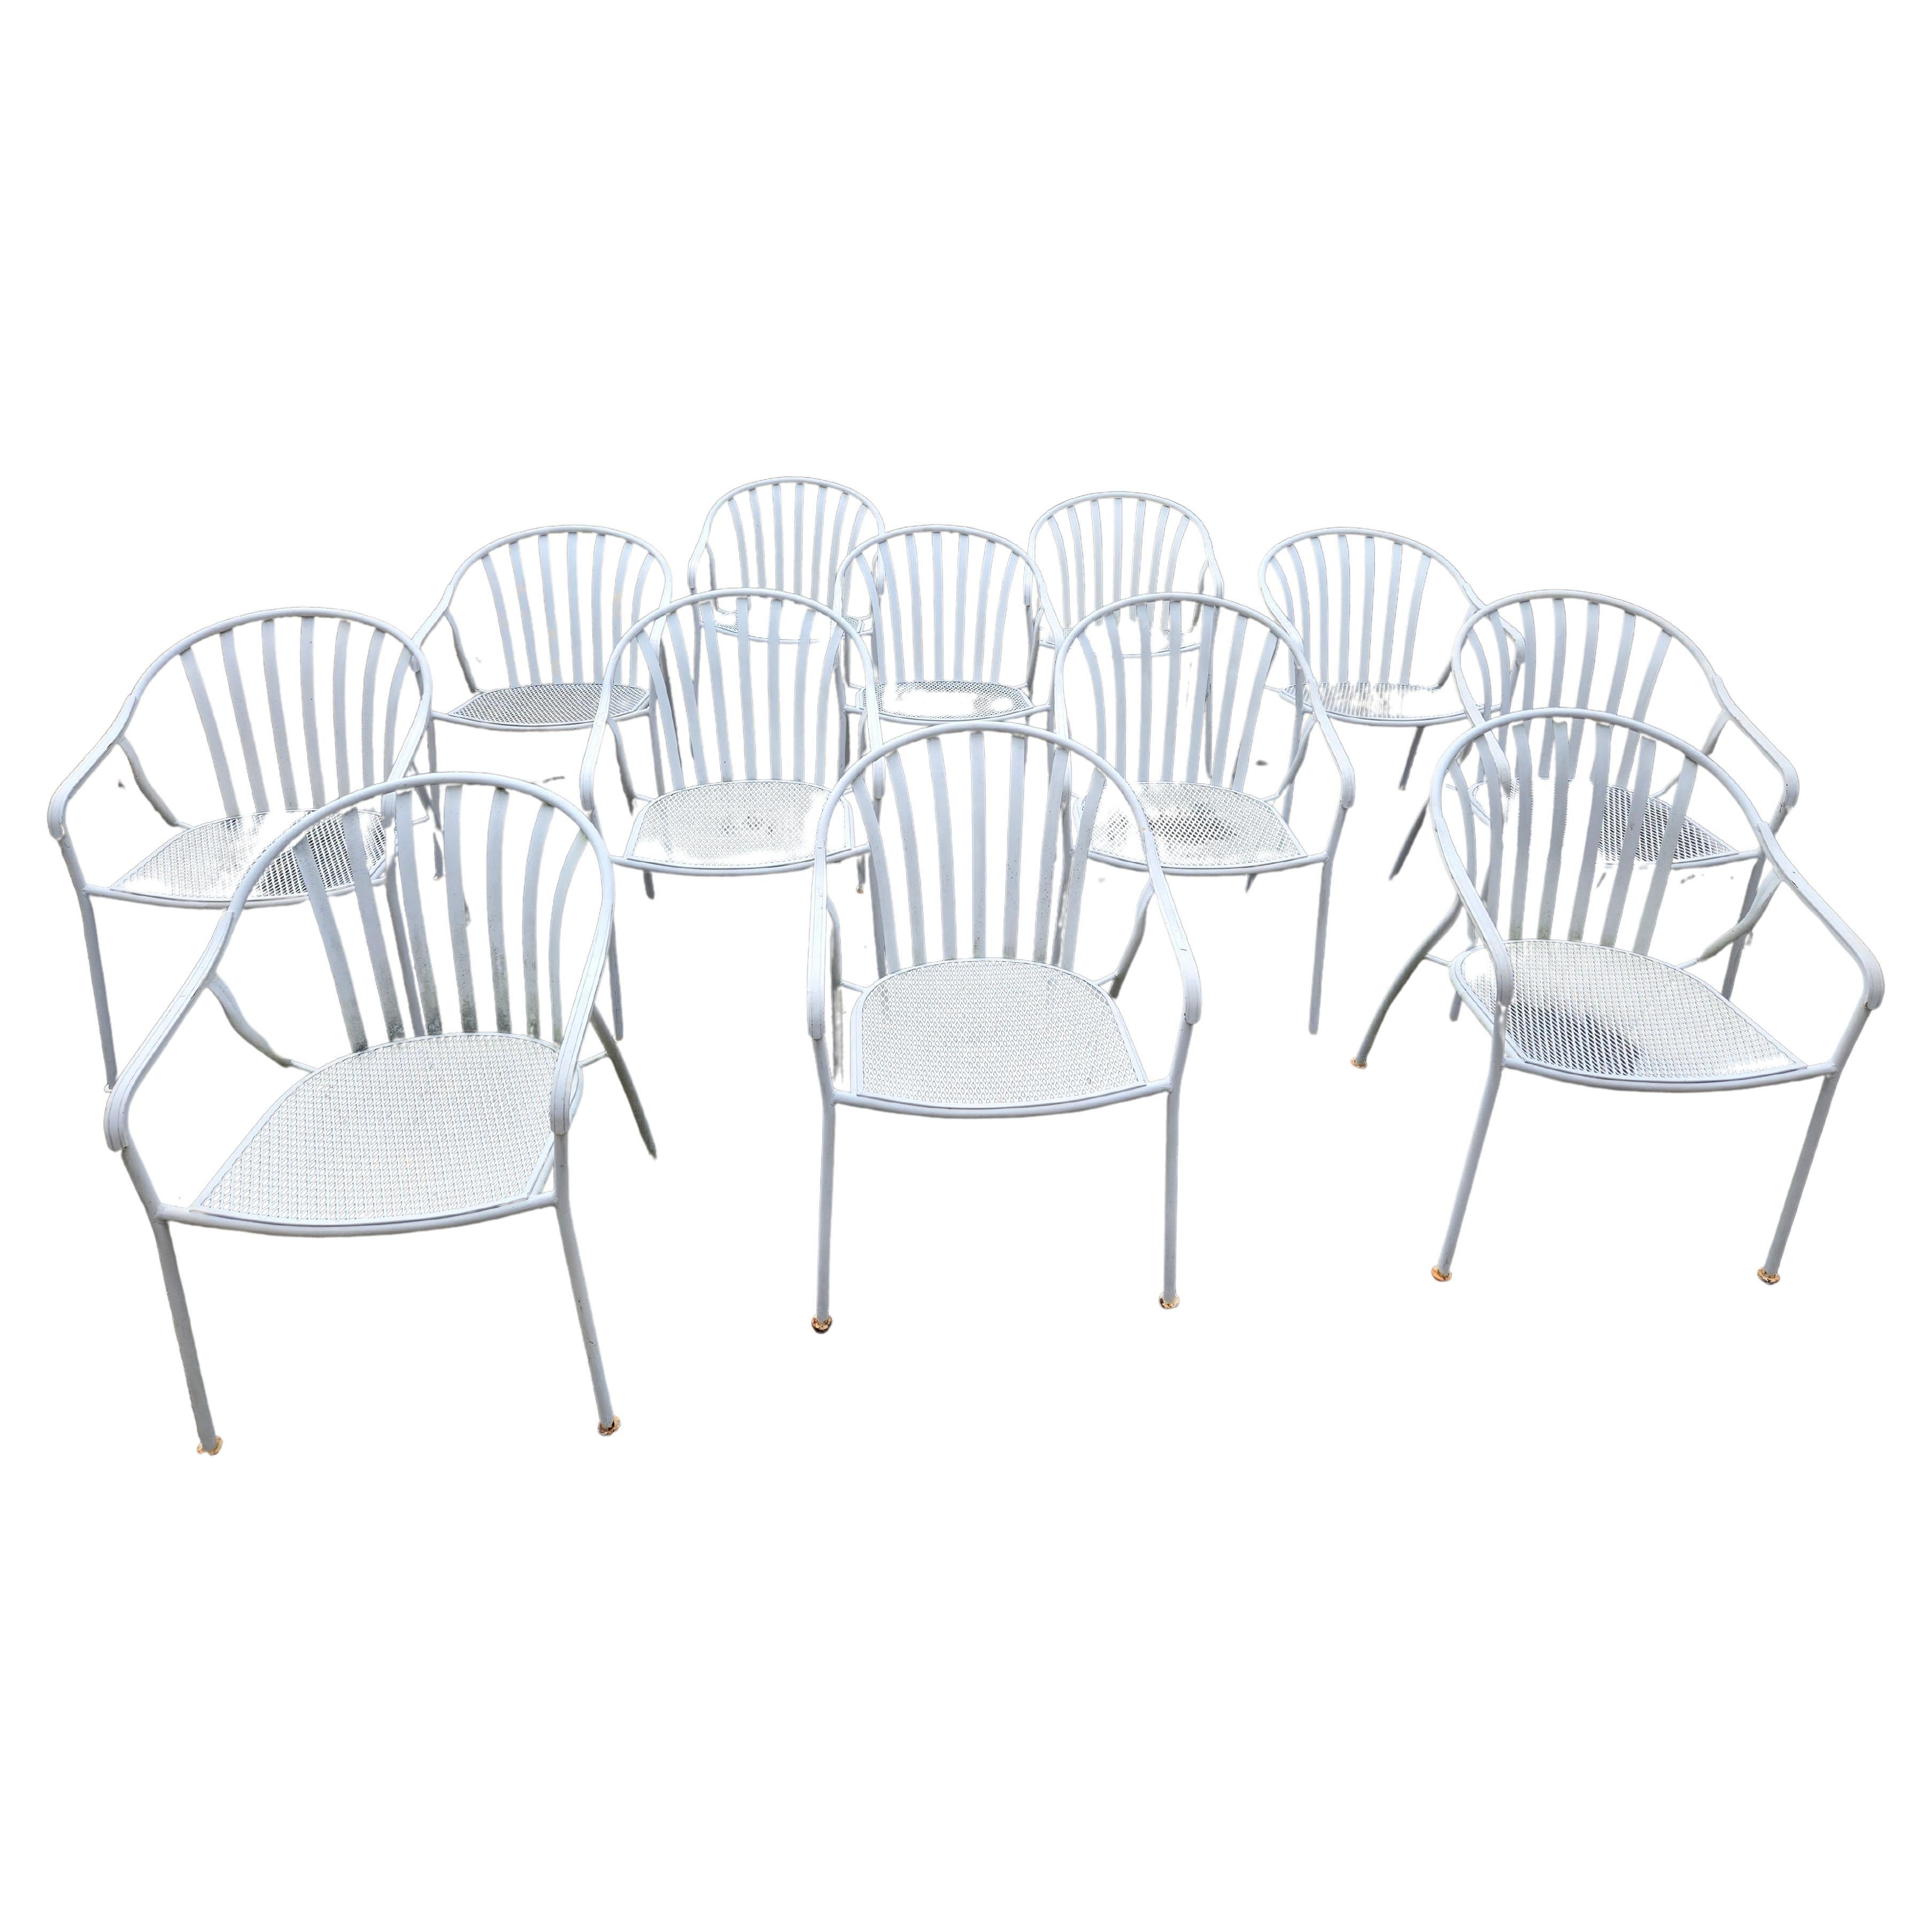 Wrought Iron Chairs by Woodard-A set of 12 For Sale